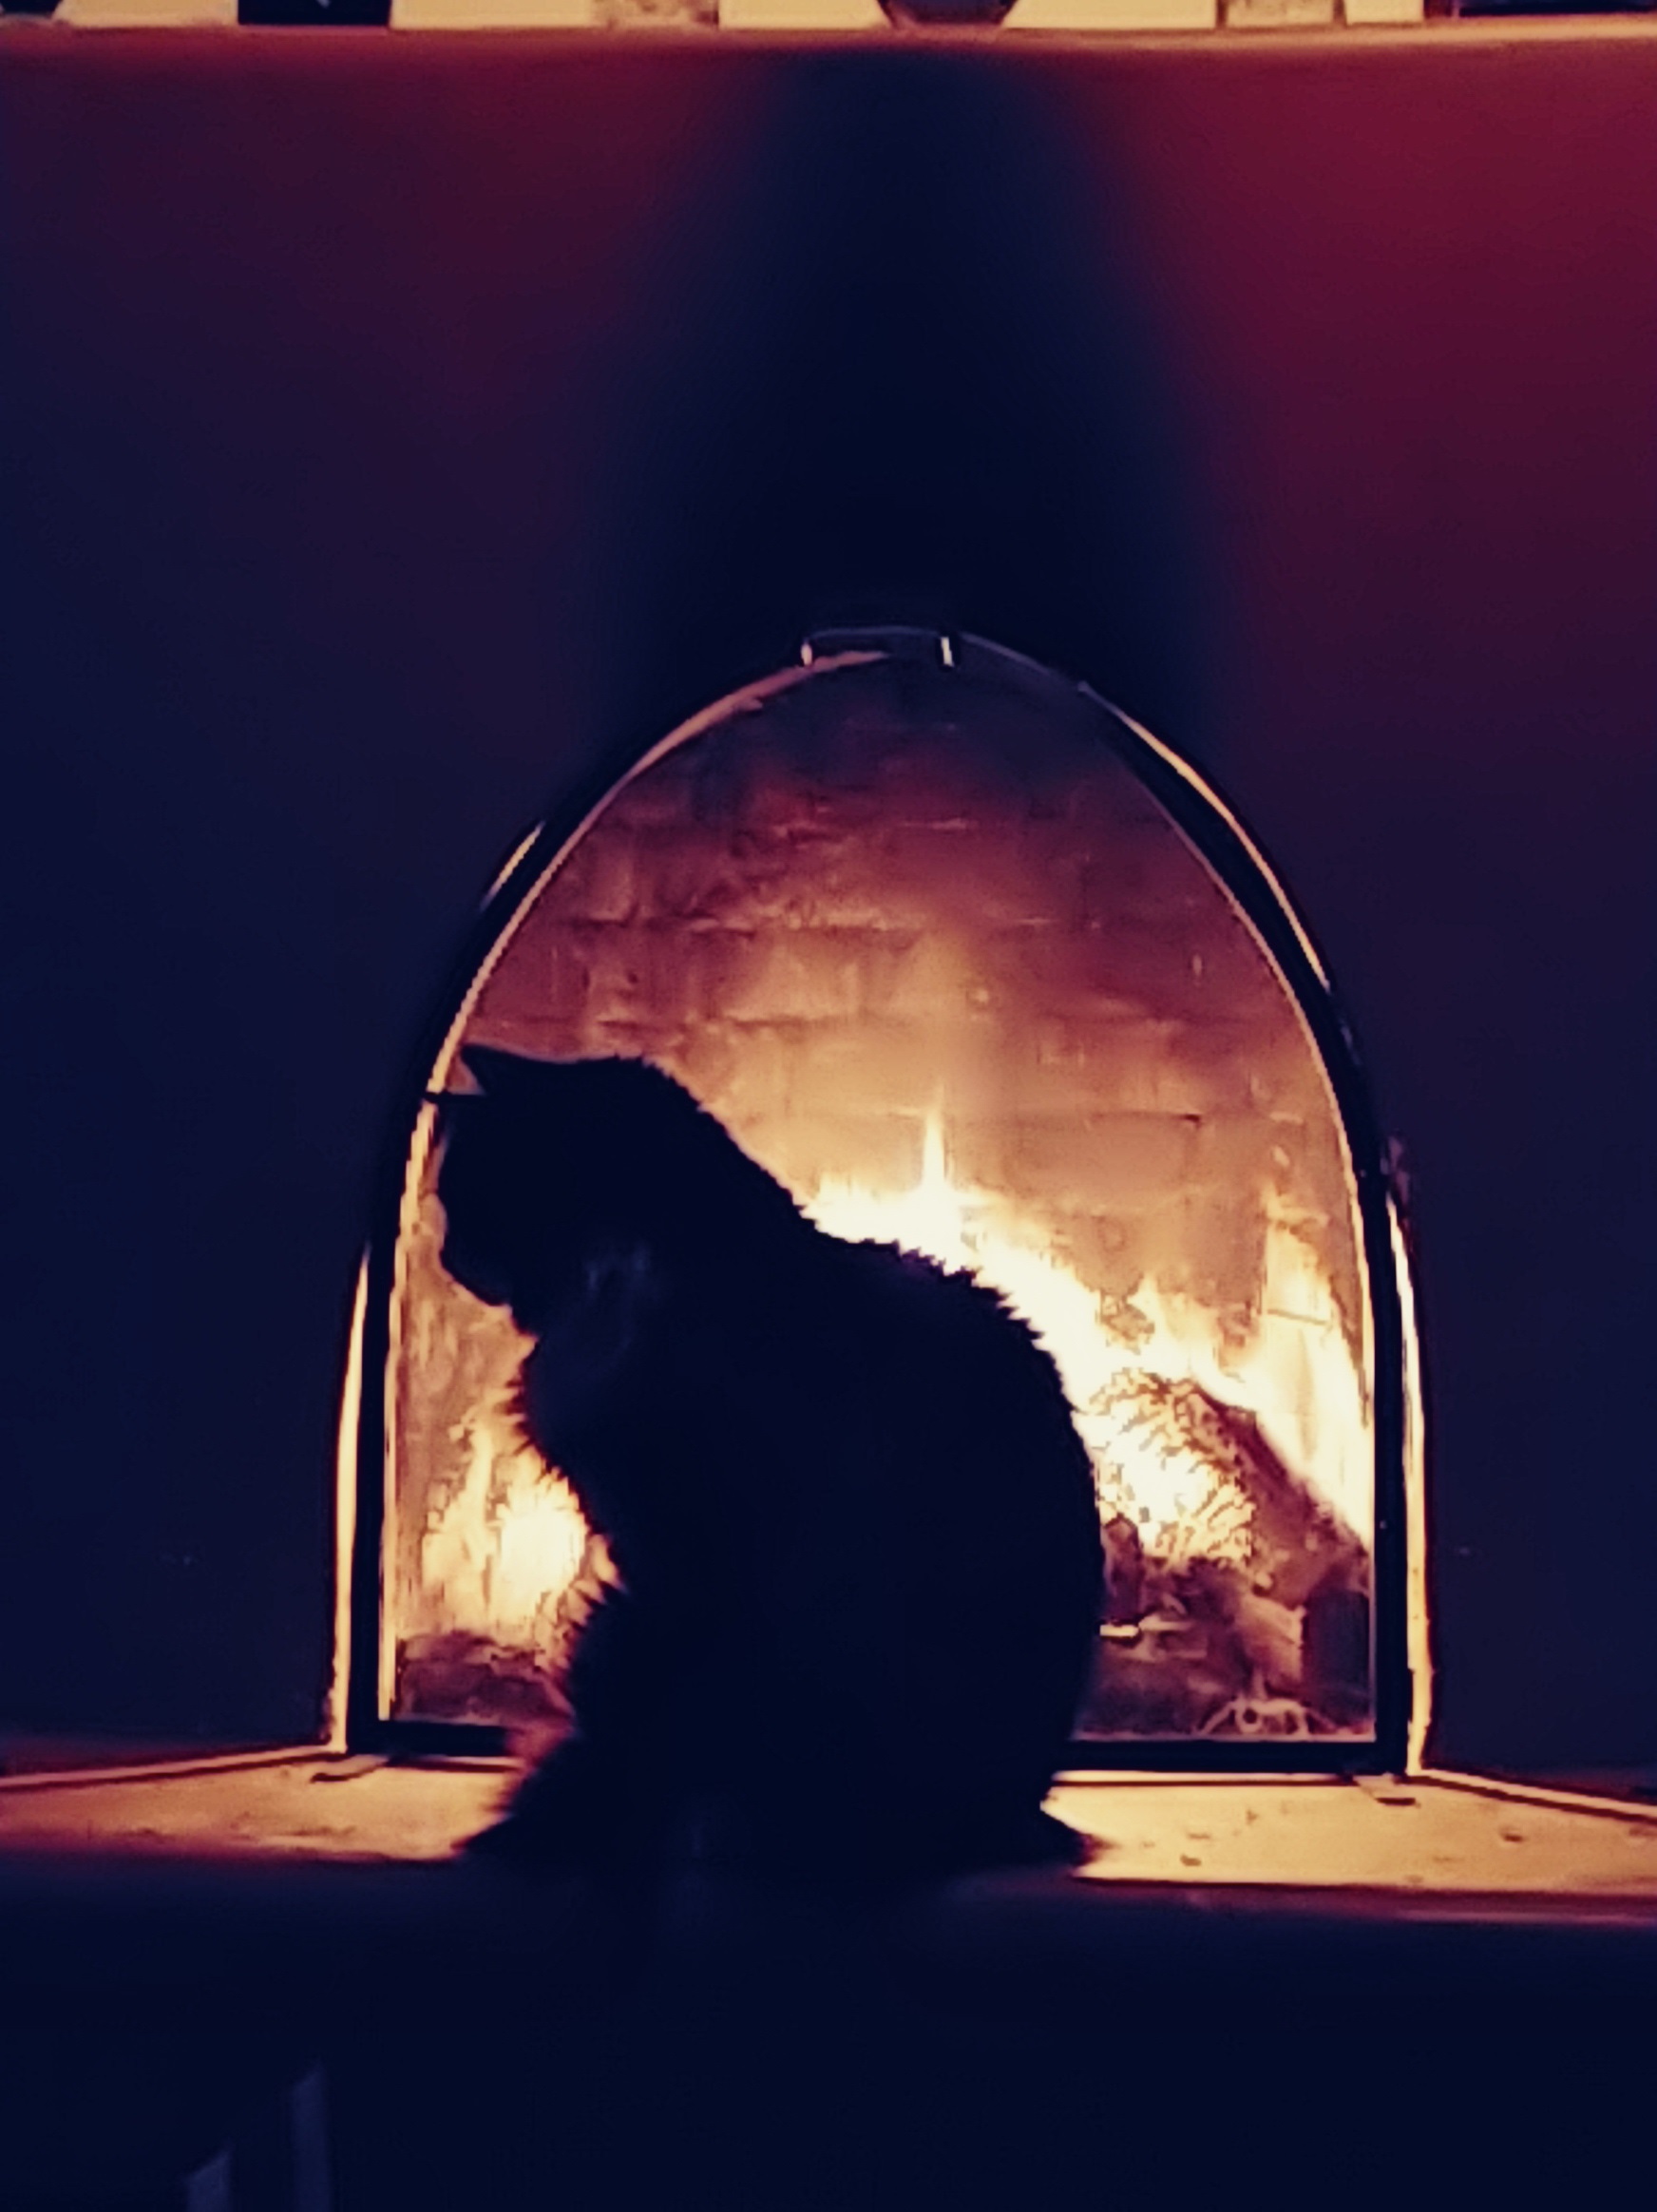 Jackson silhouetted by the fire